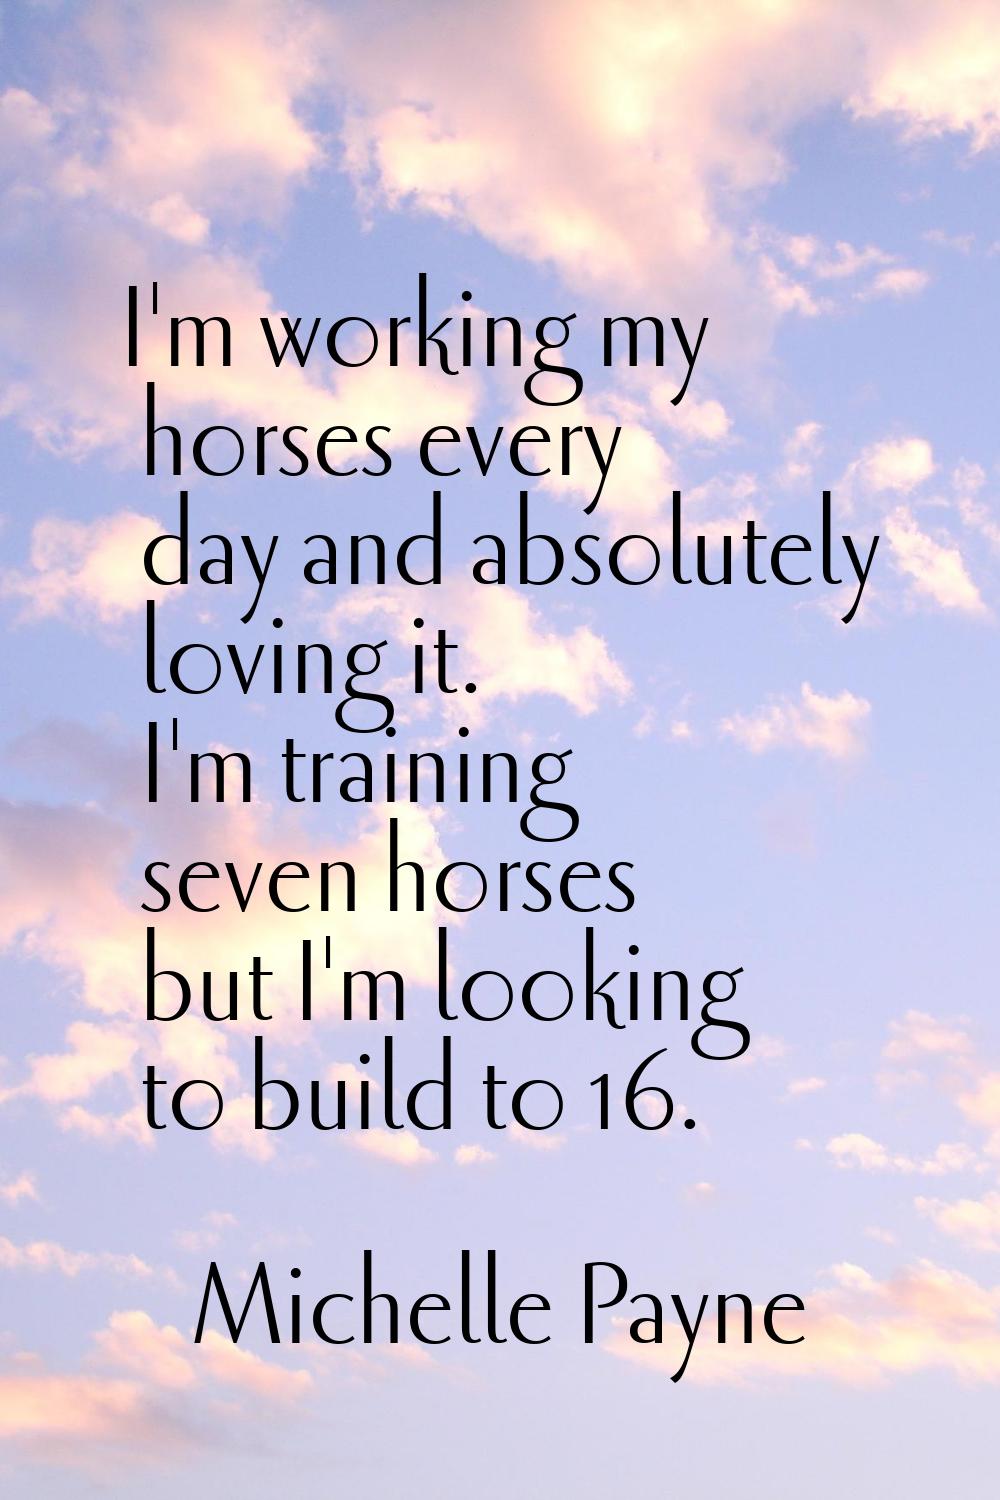 I'm working my horses every day and absolutely loving it. I'm training seven horses but I'm looking